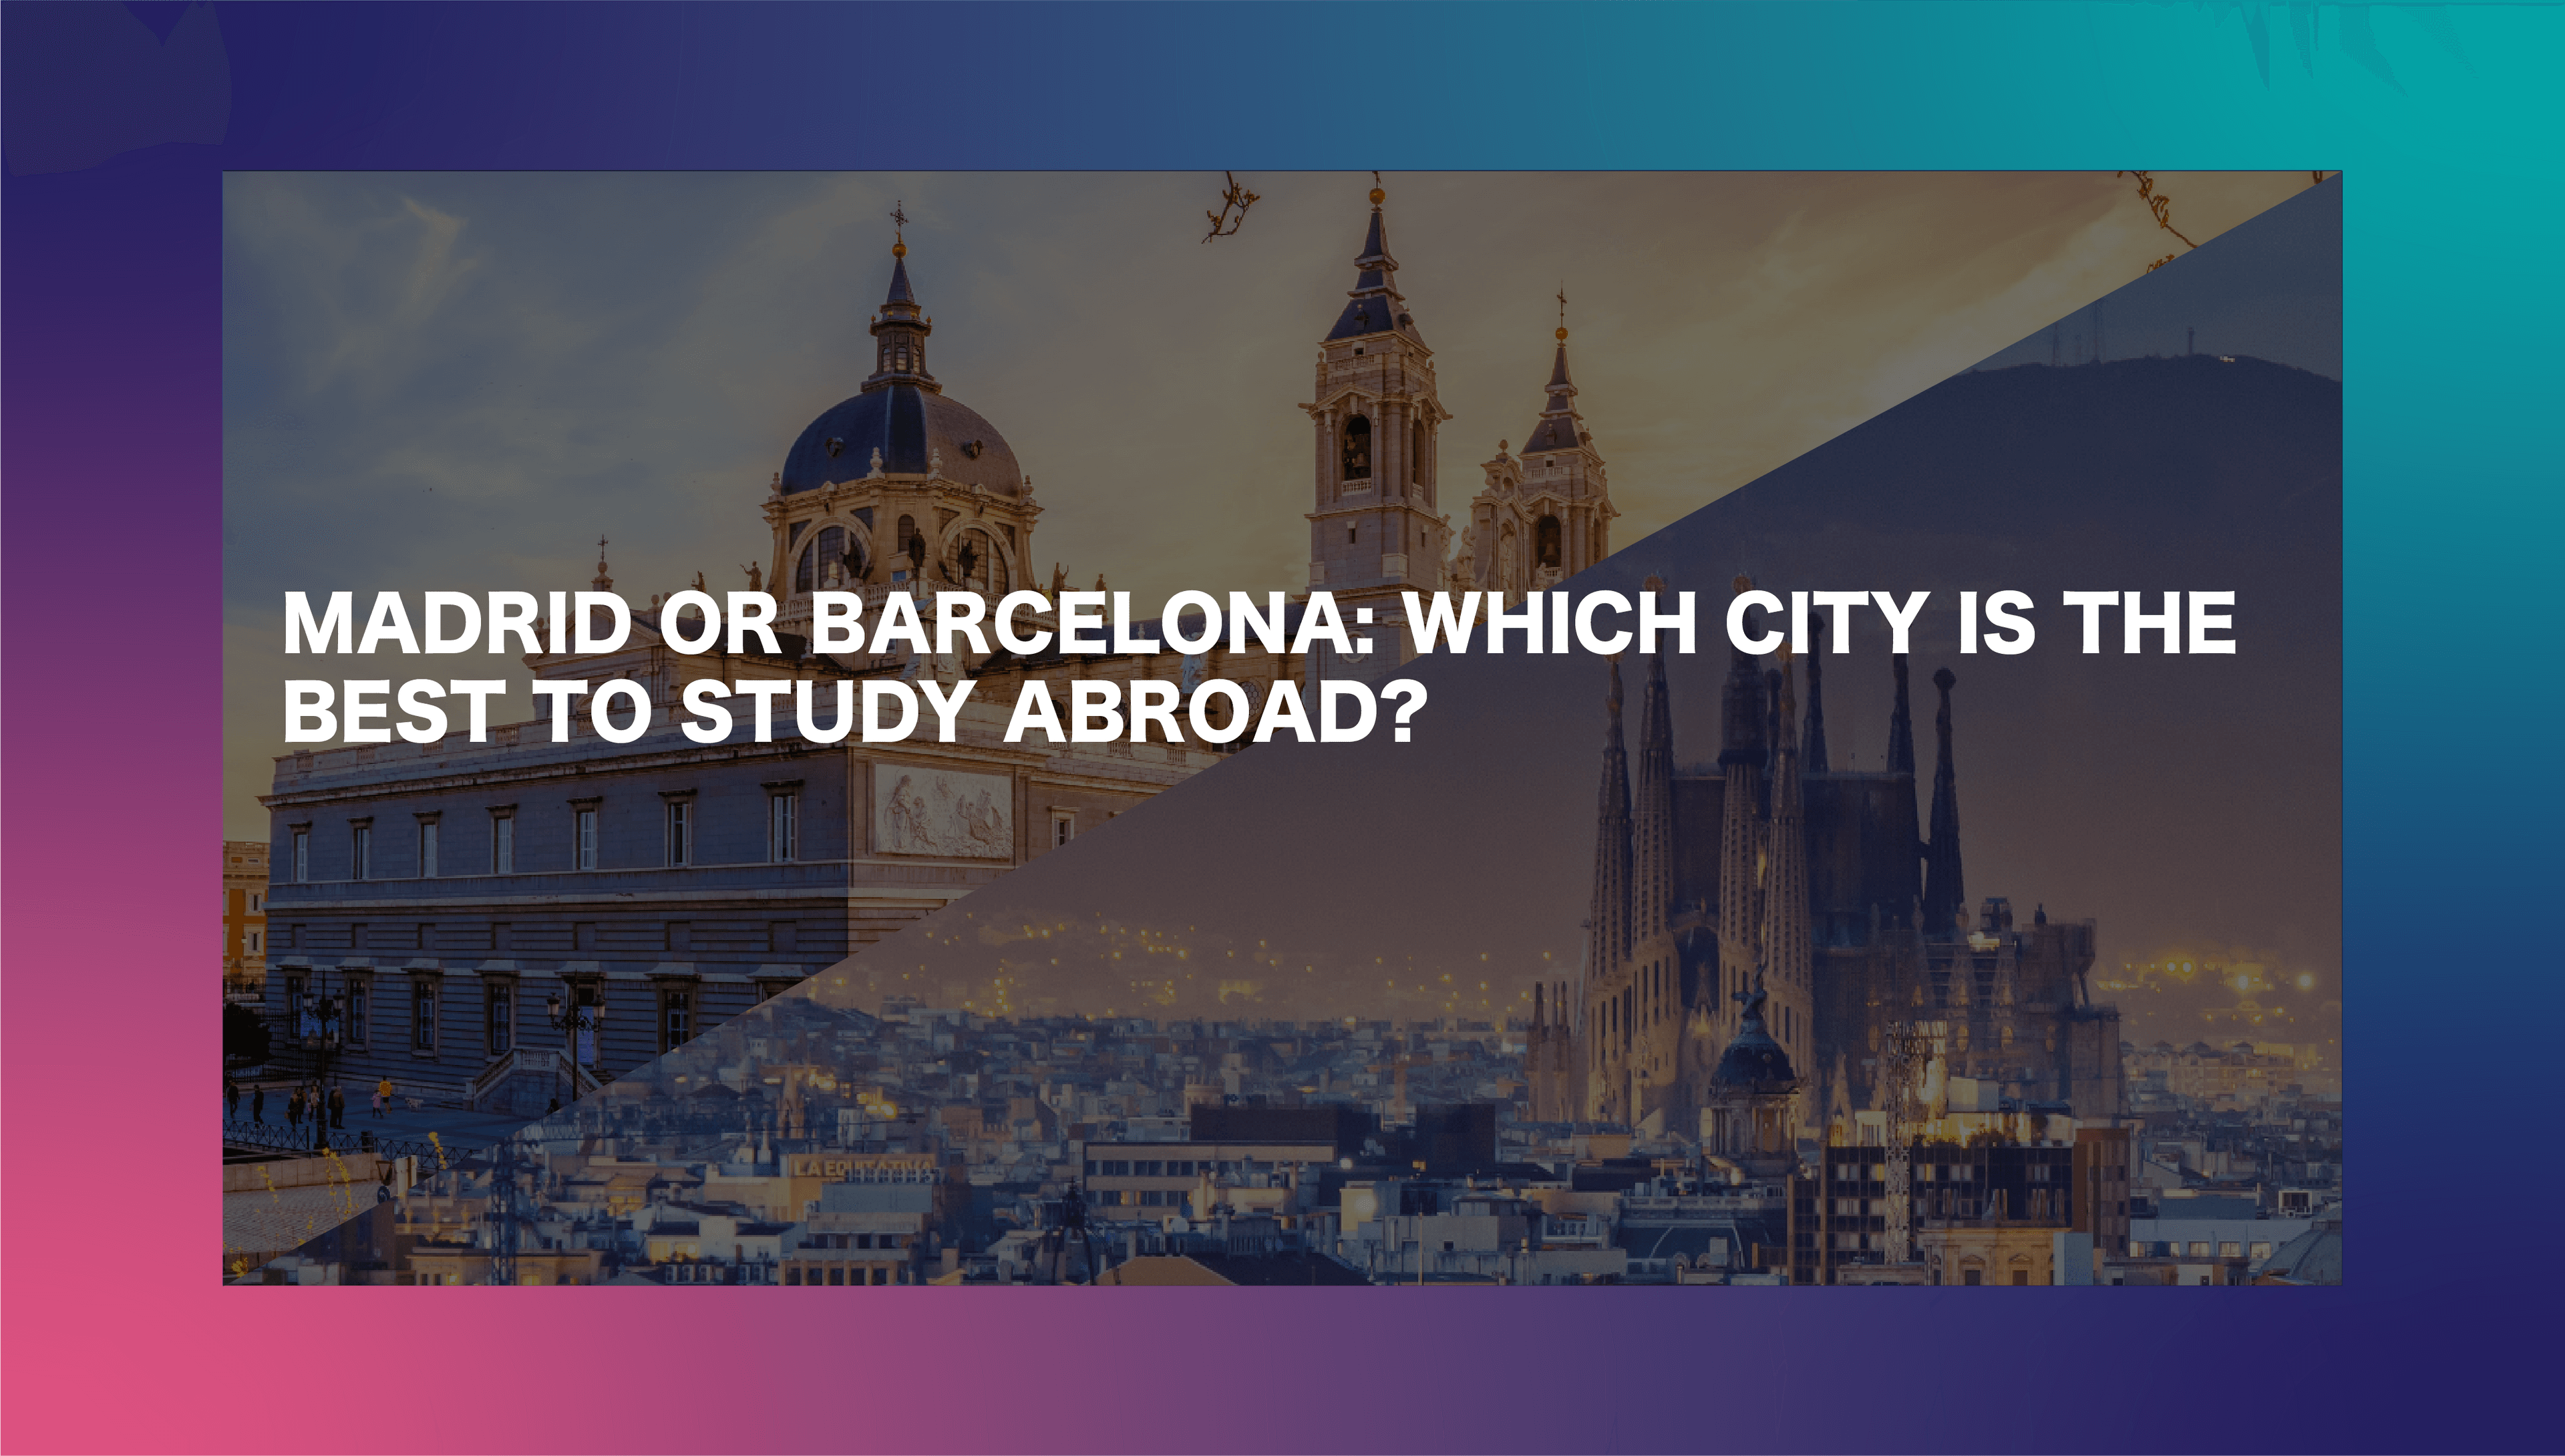 Madrid or Barcelona - Which City is the Best to Study Abroad?